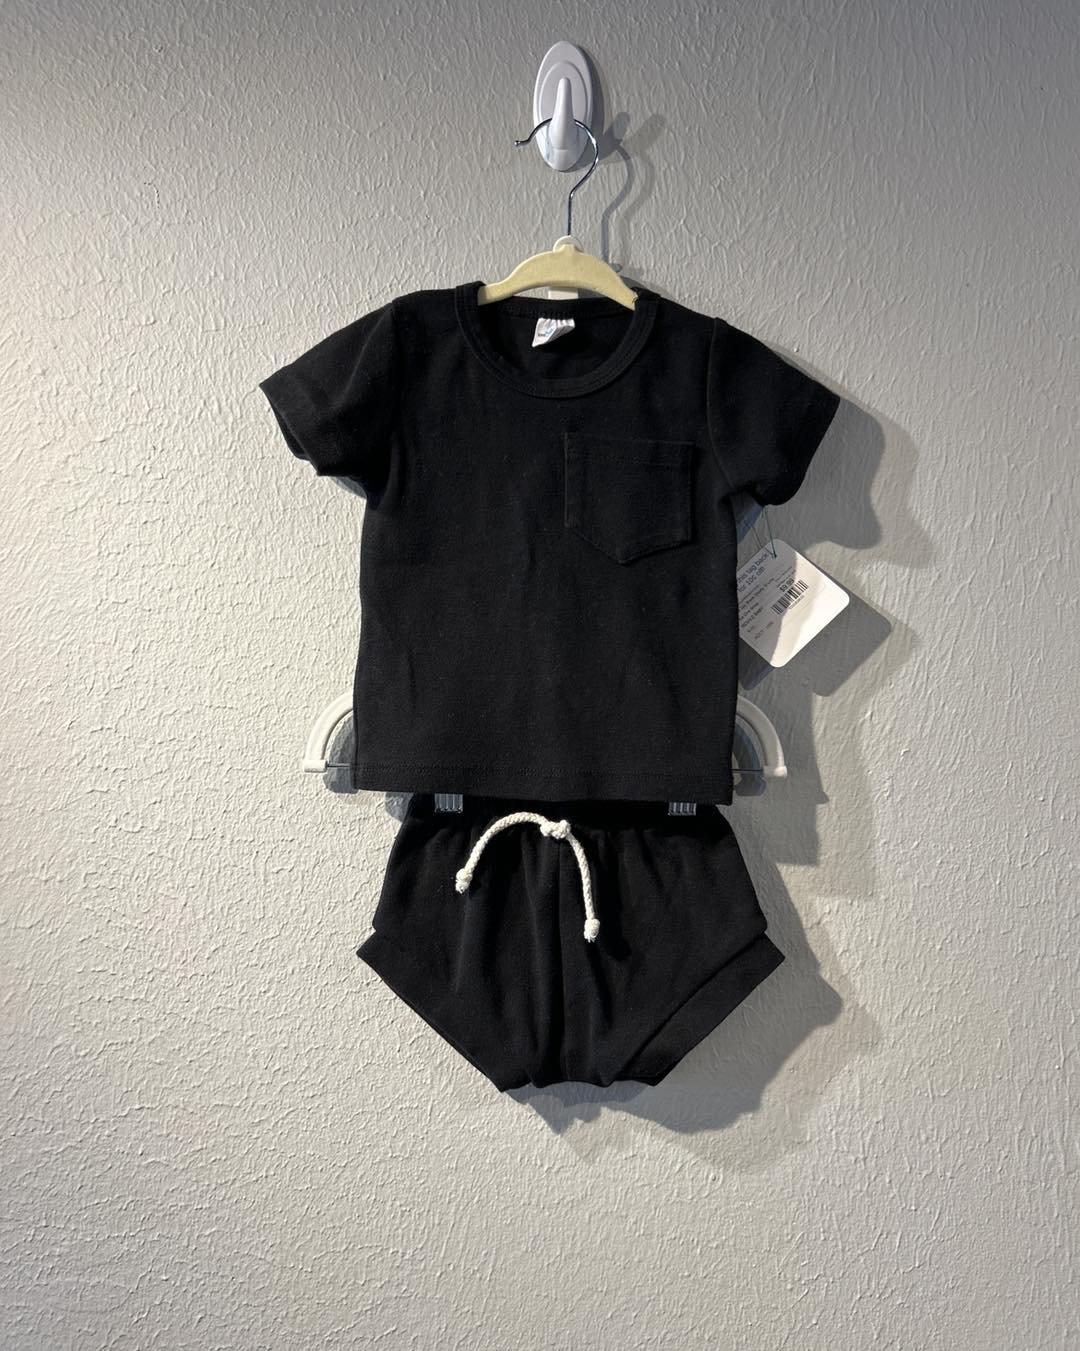 This little black shorts and tee shirt came in used, and I am obsessed with the quality! It&rsquo;s super thick cotton, soo soft &amp; comfy! Knowing these hold up so well, I had to order some new ones for the shop

Sooo&hellip;Check out our adorable